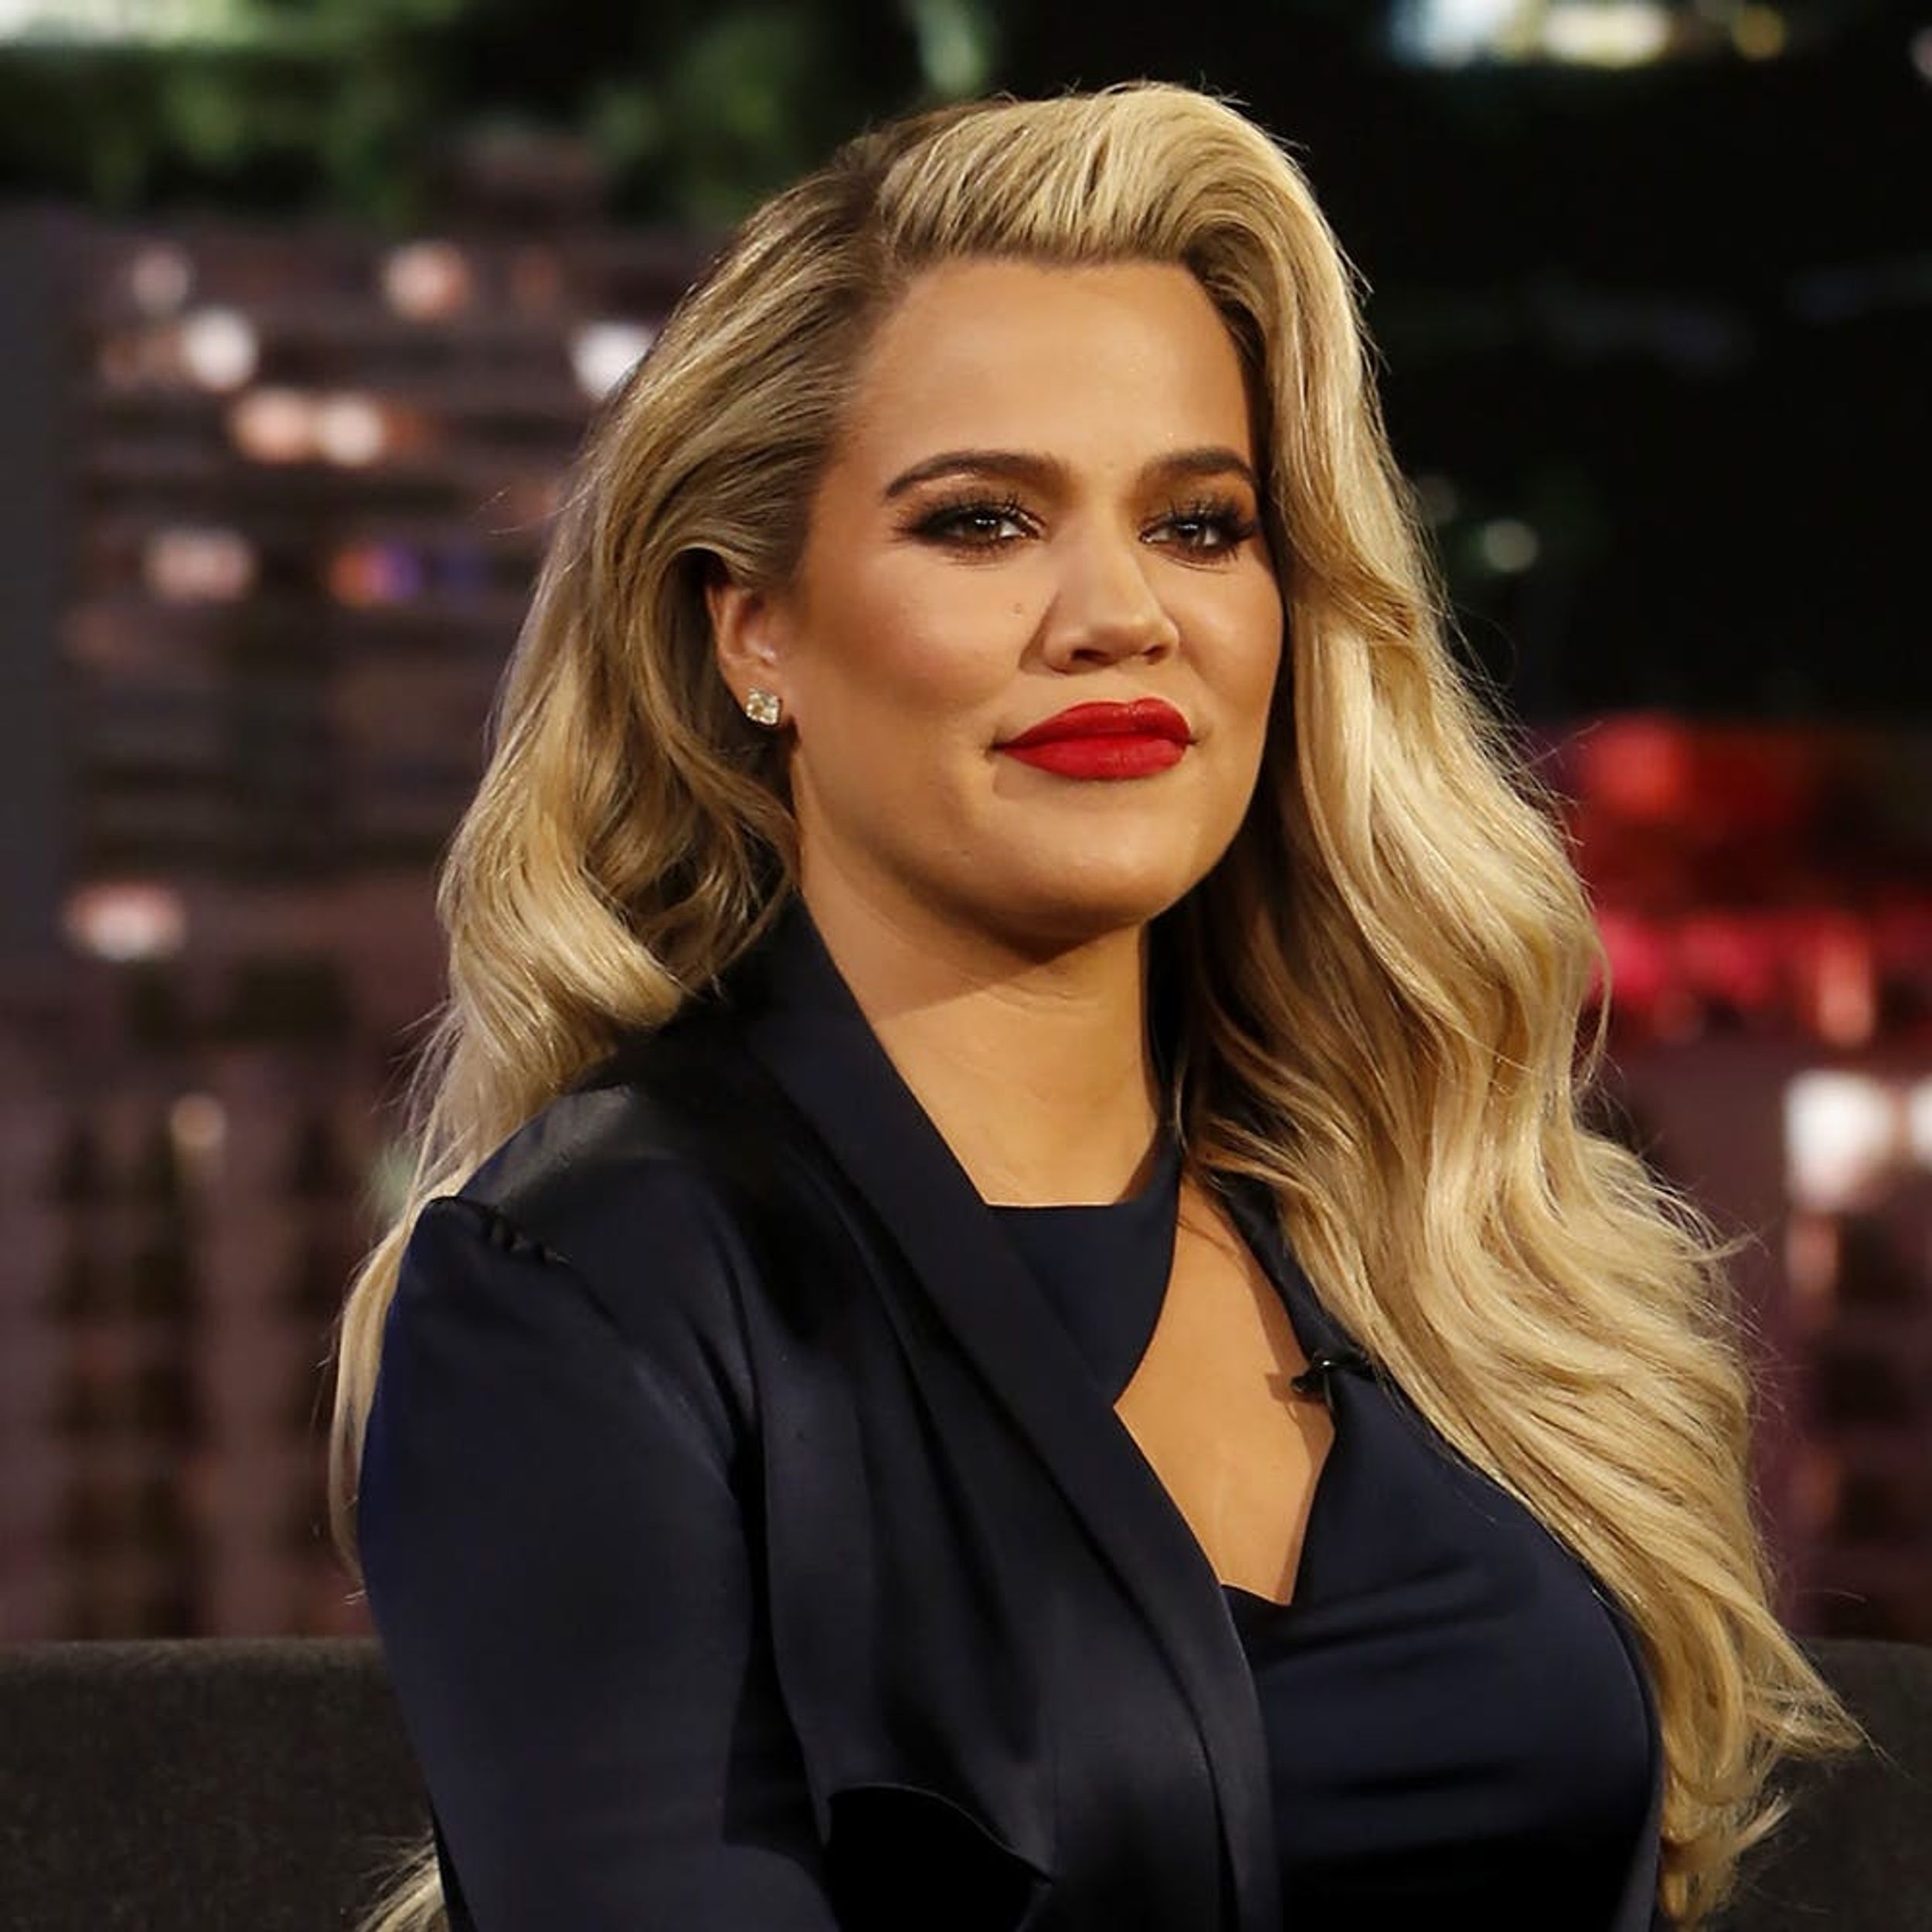 Khloé Kardashian Is Introducing Maternity Jeans to Her Good American Line